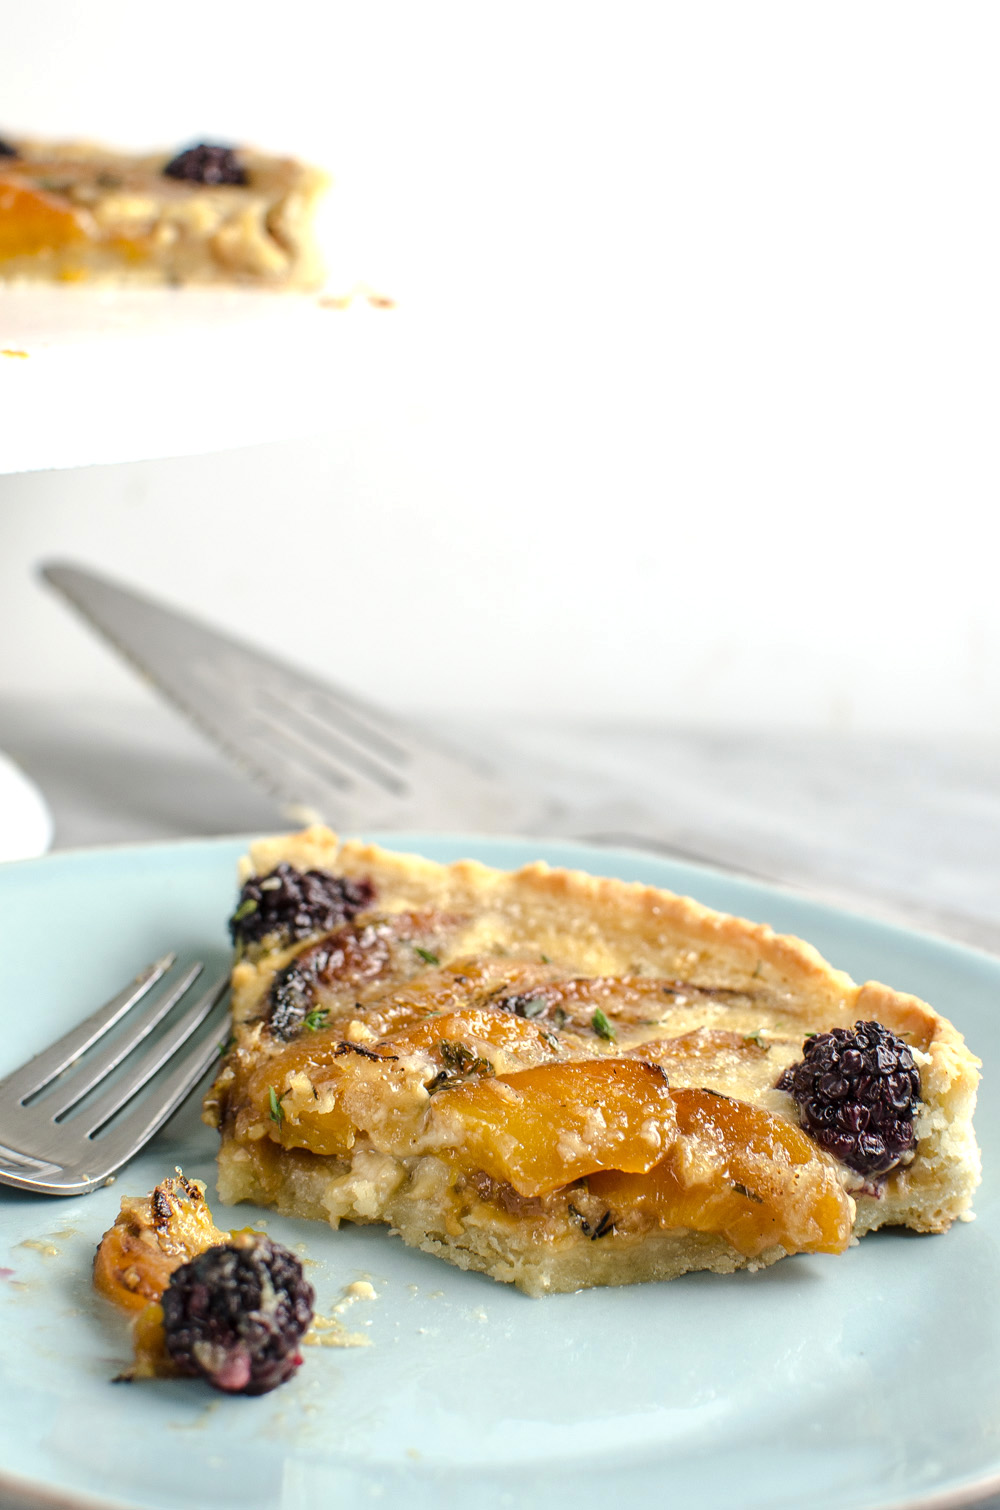 Cheddar, Caramelized Peach and Thyme Tart - A wonderfully fruity, tangy creamy fruit tart! A unique flavor profile that will wow your guests and perfect for any season!